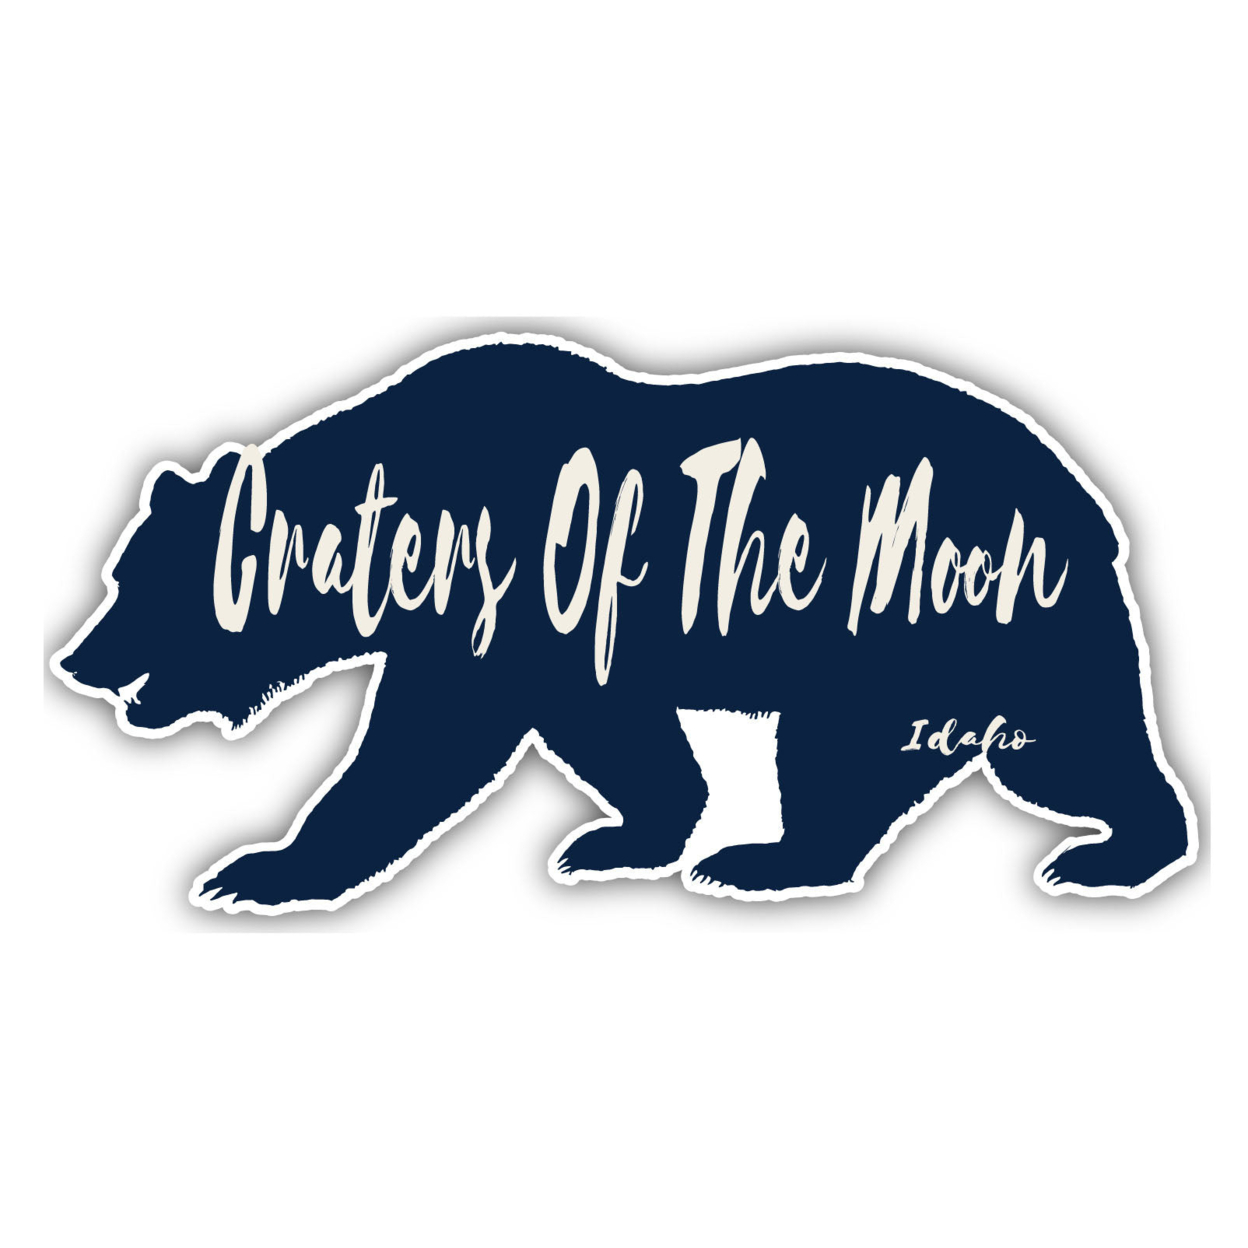 Craters Of The Moon Idaho Souvenir Decorative Stickers (Choose Theme And Size) - Single Unit, 6-Inch, Bear